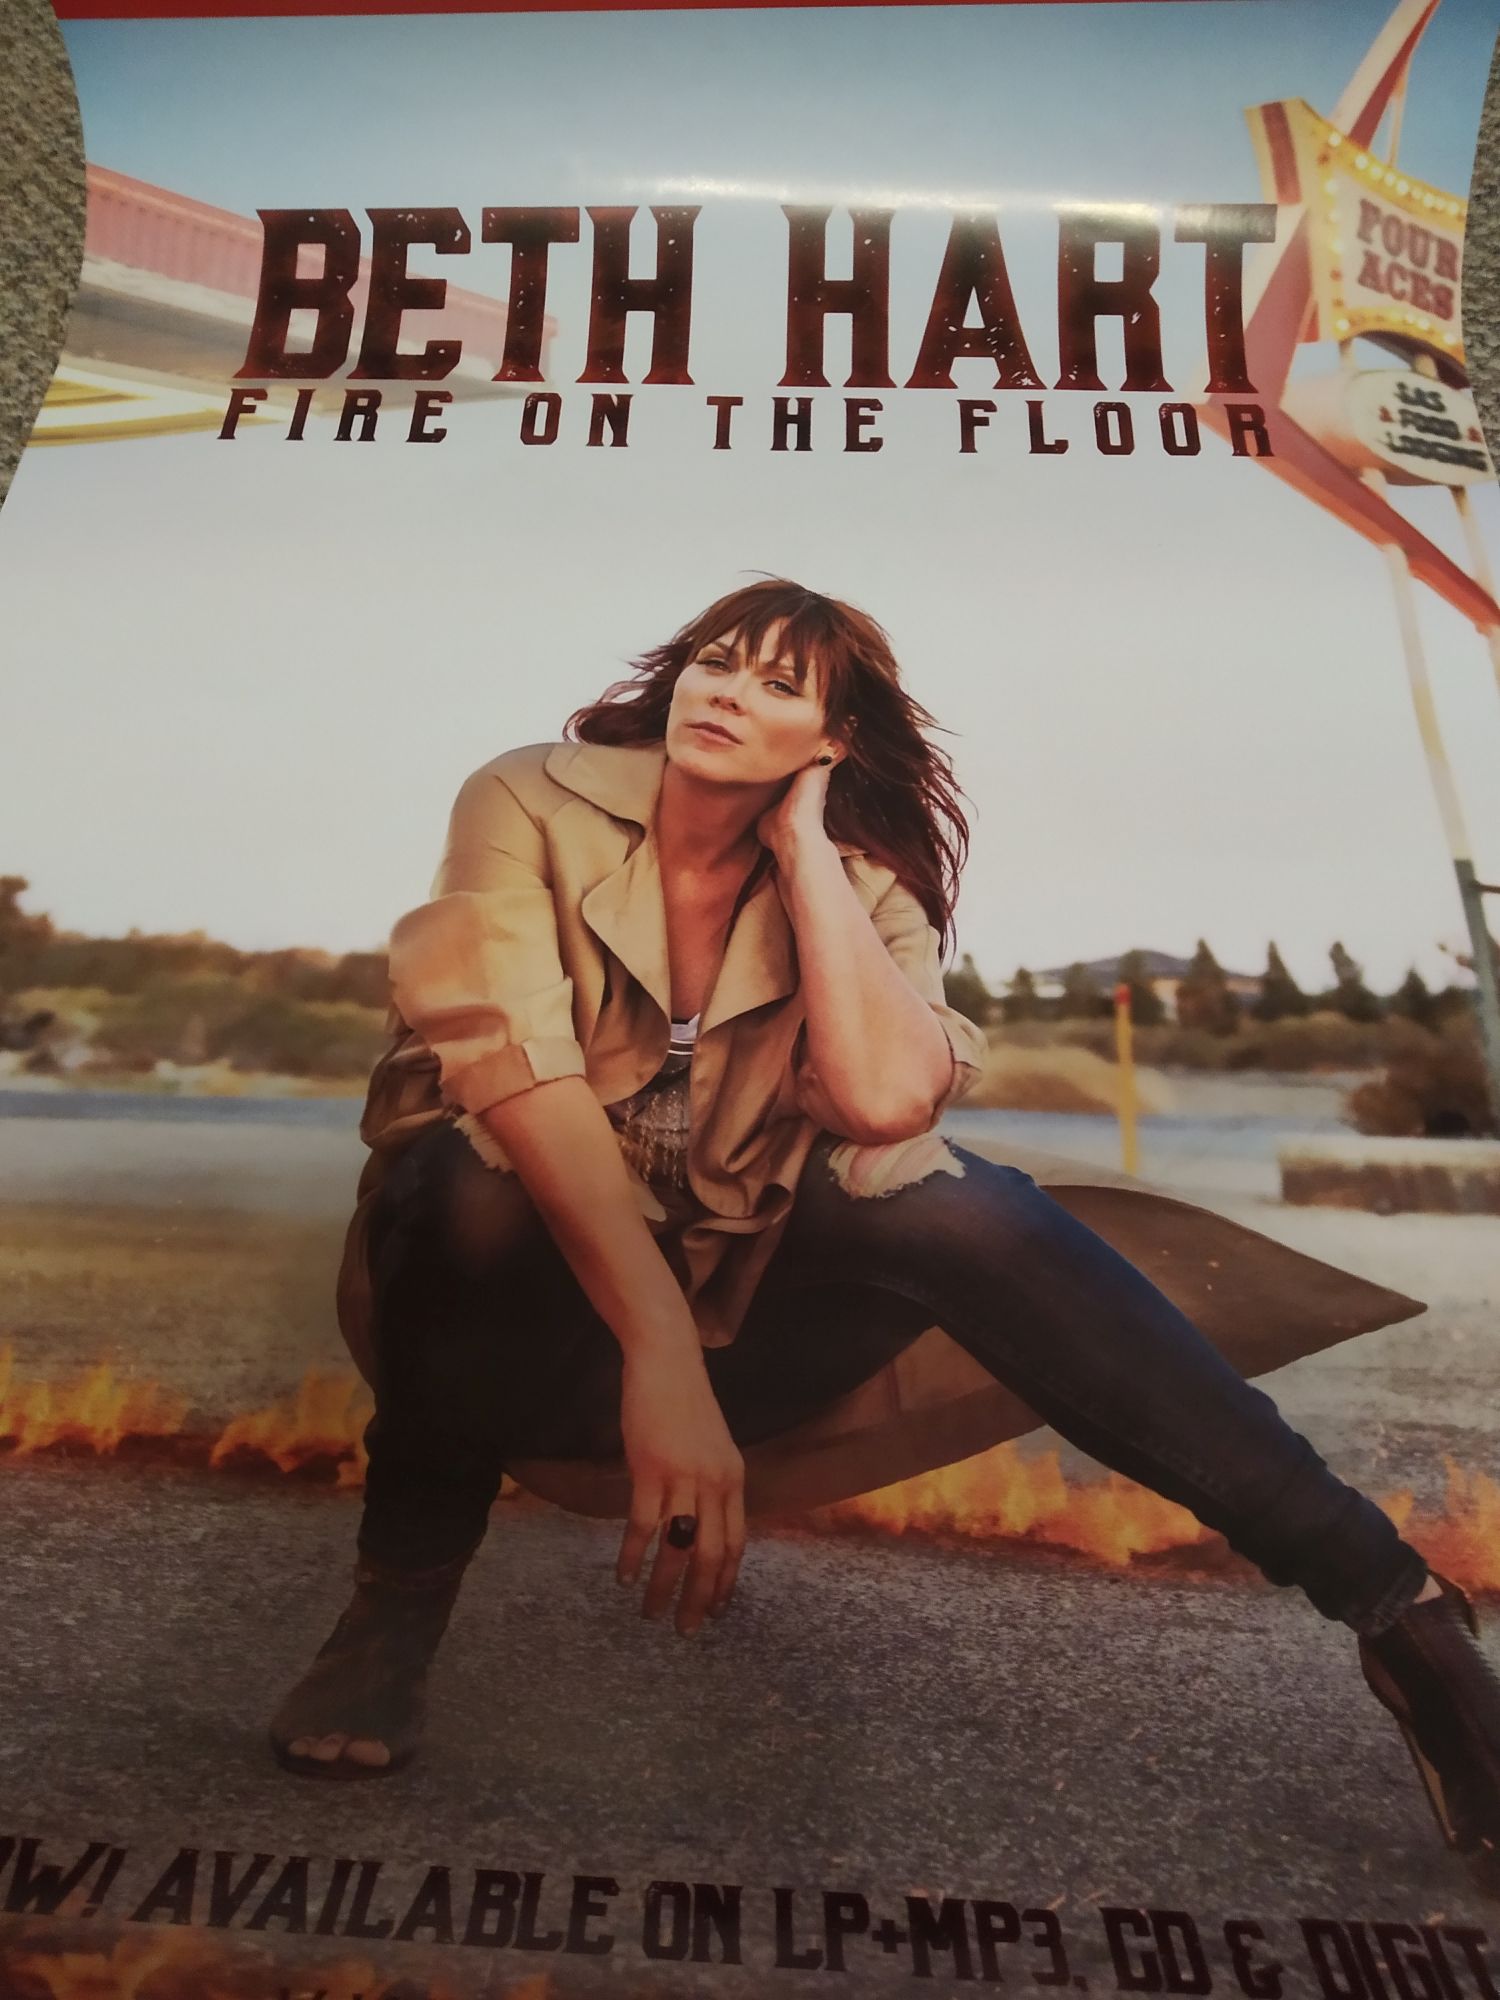 BETH HART - Fire On The Flood -POSTER